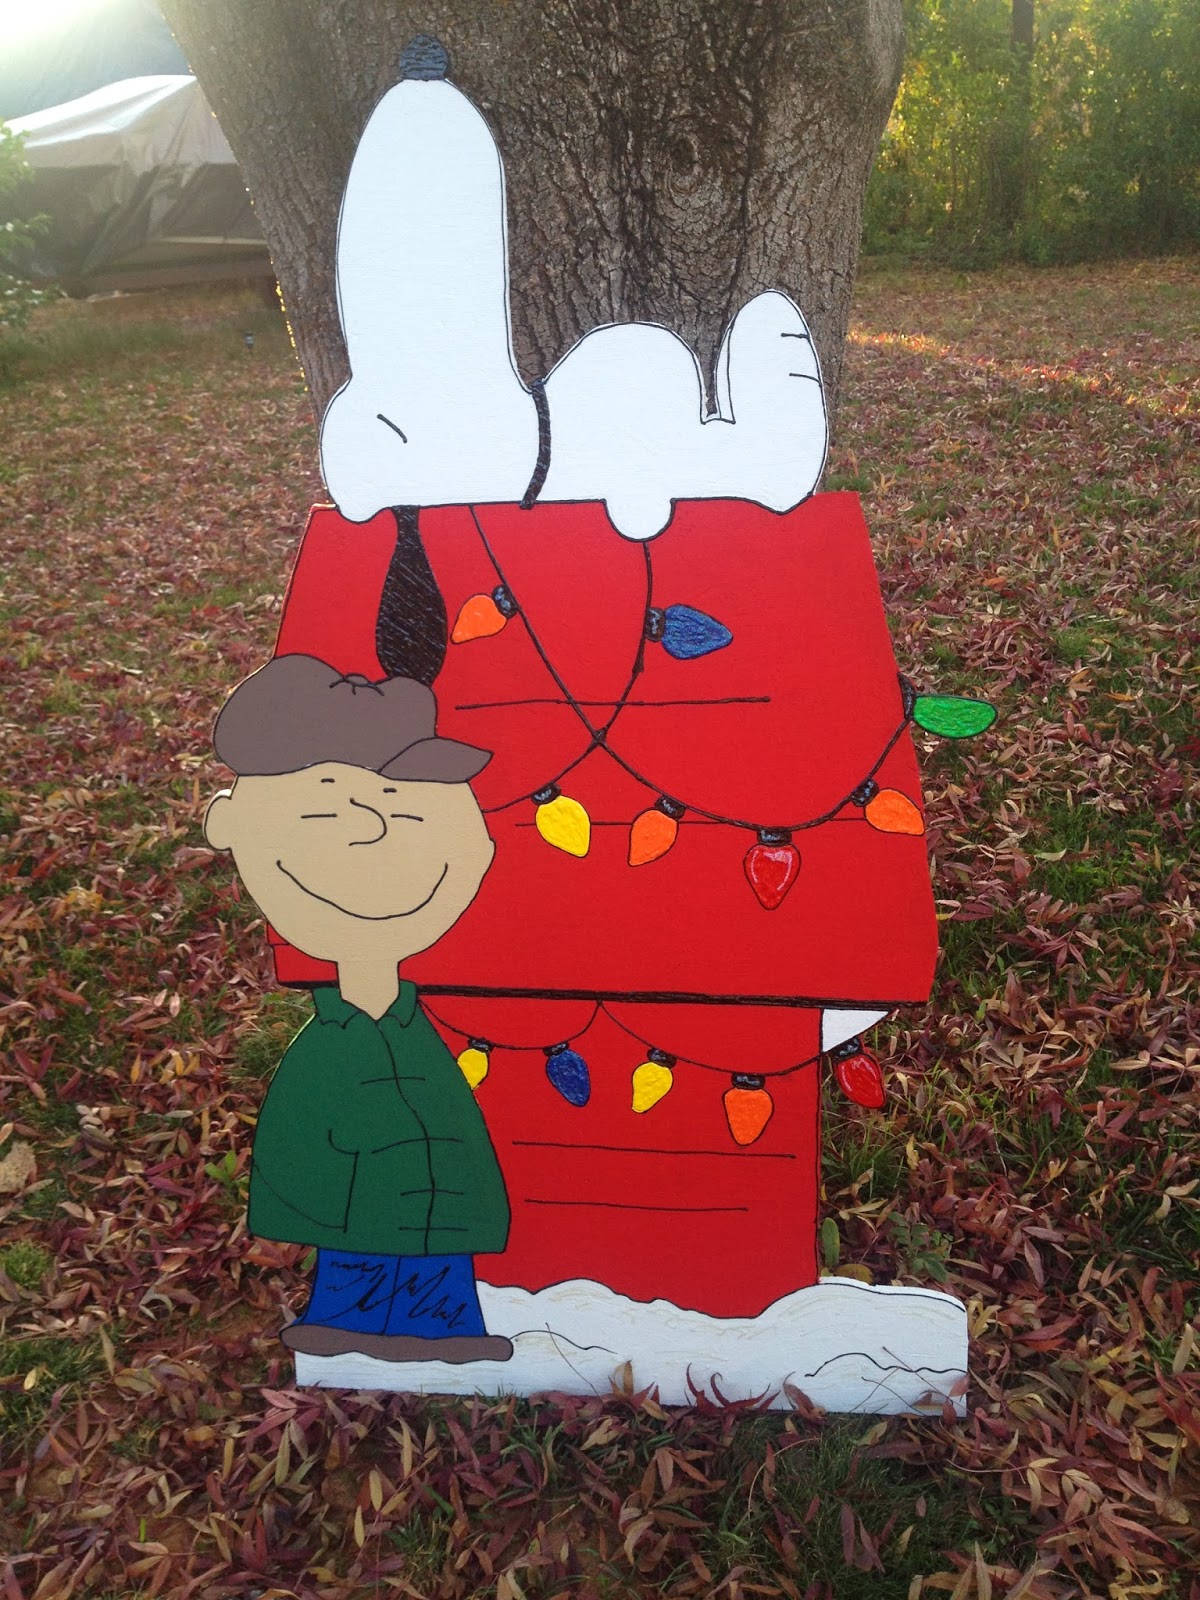 Designs By Jeannine: Peanuts Charlie Brown Christmas Decorations